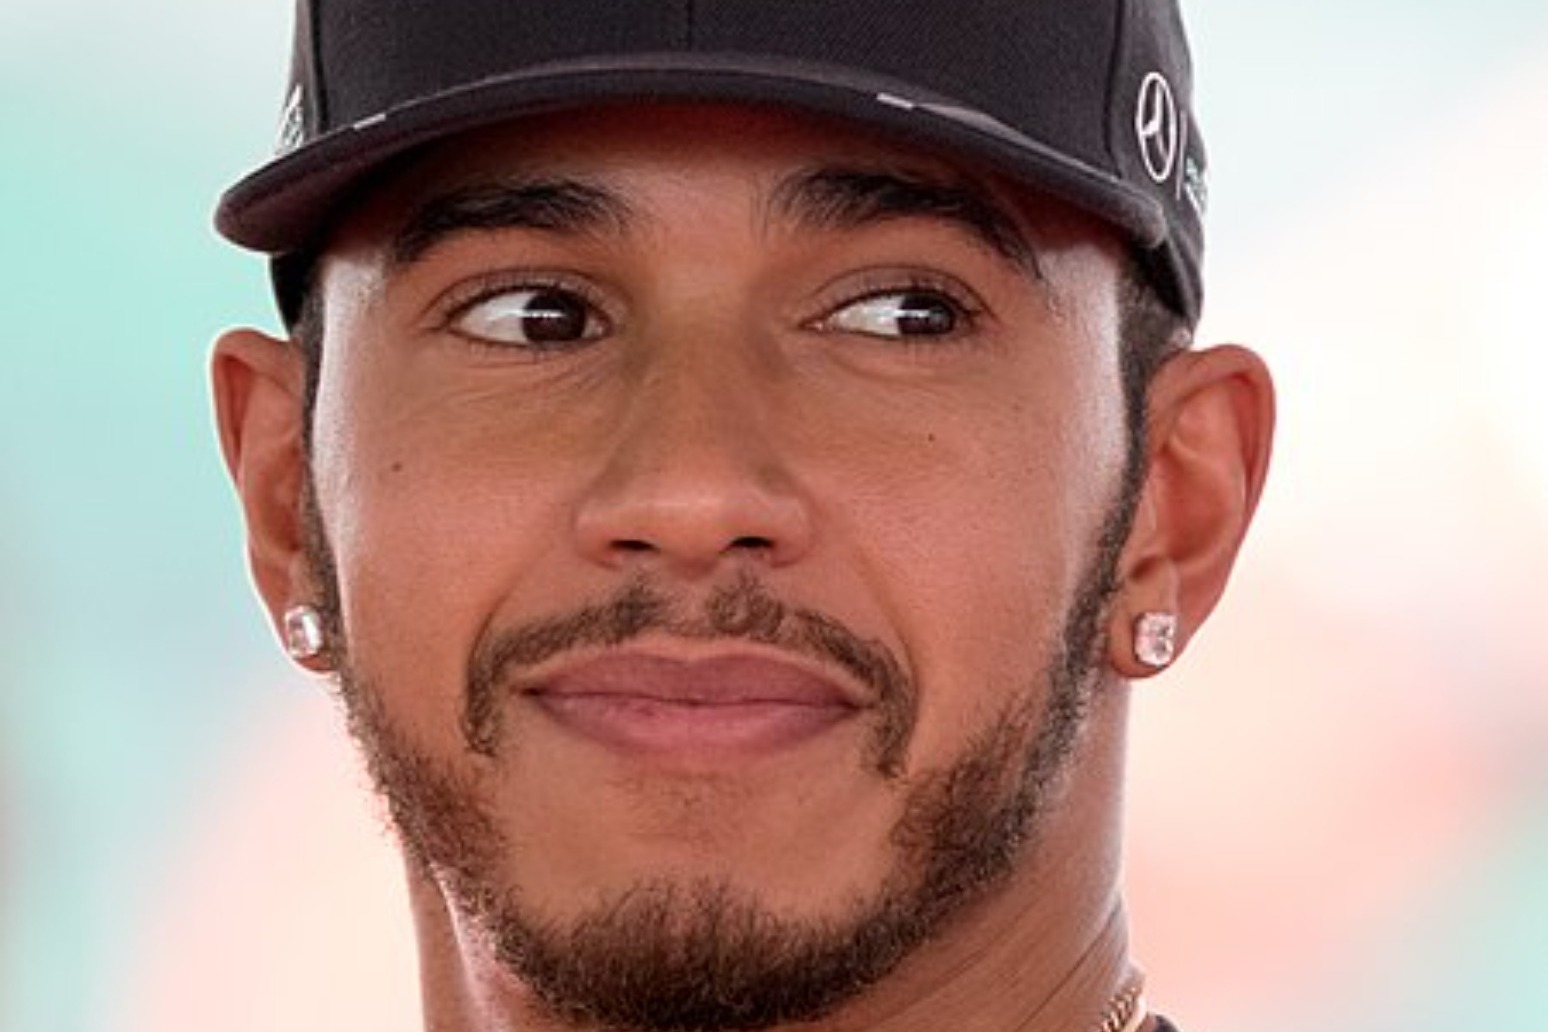 Lewis Hamilton insists racing rules are still unclear after claiming Qatar pole 